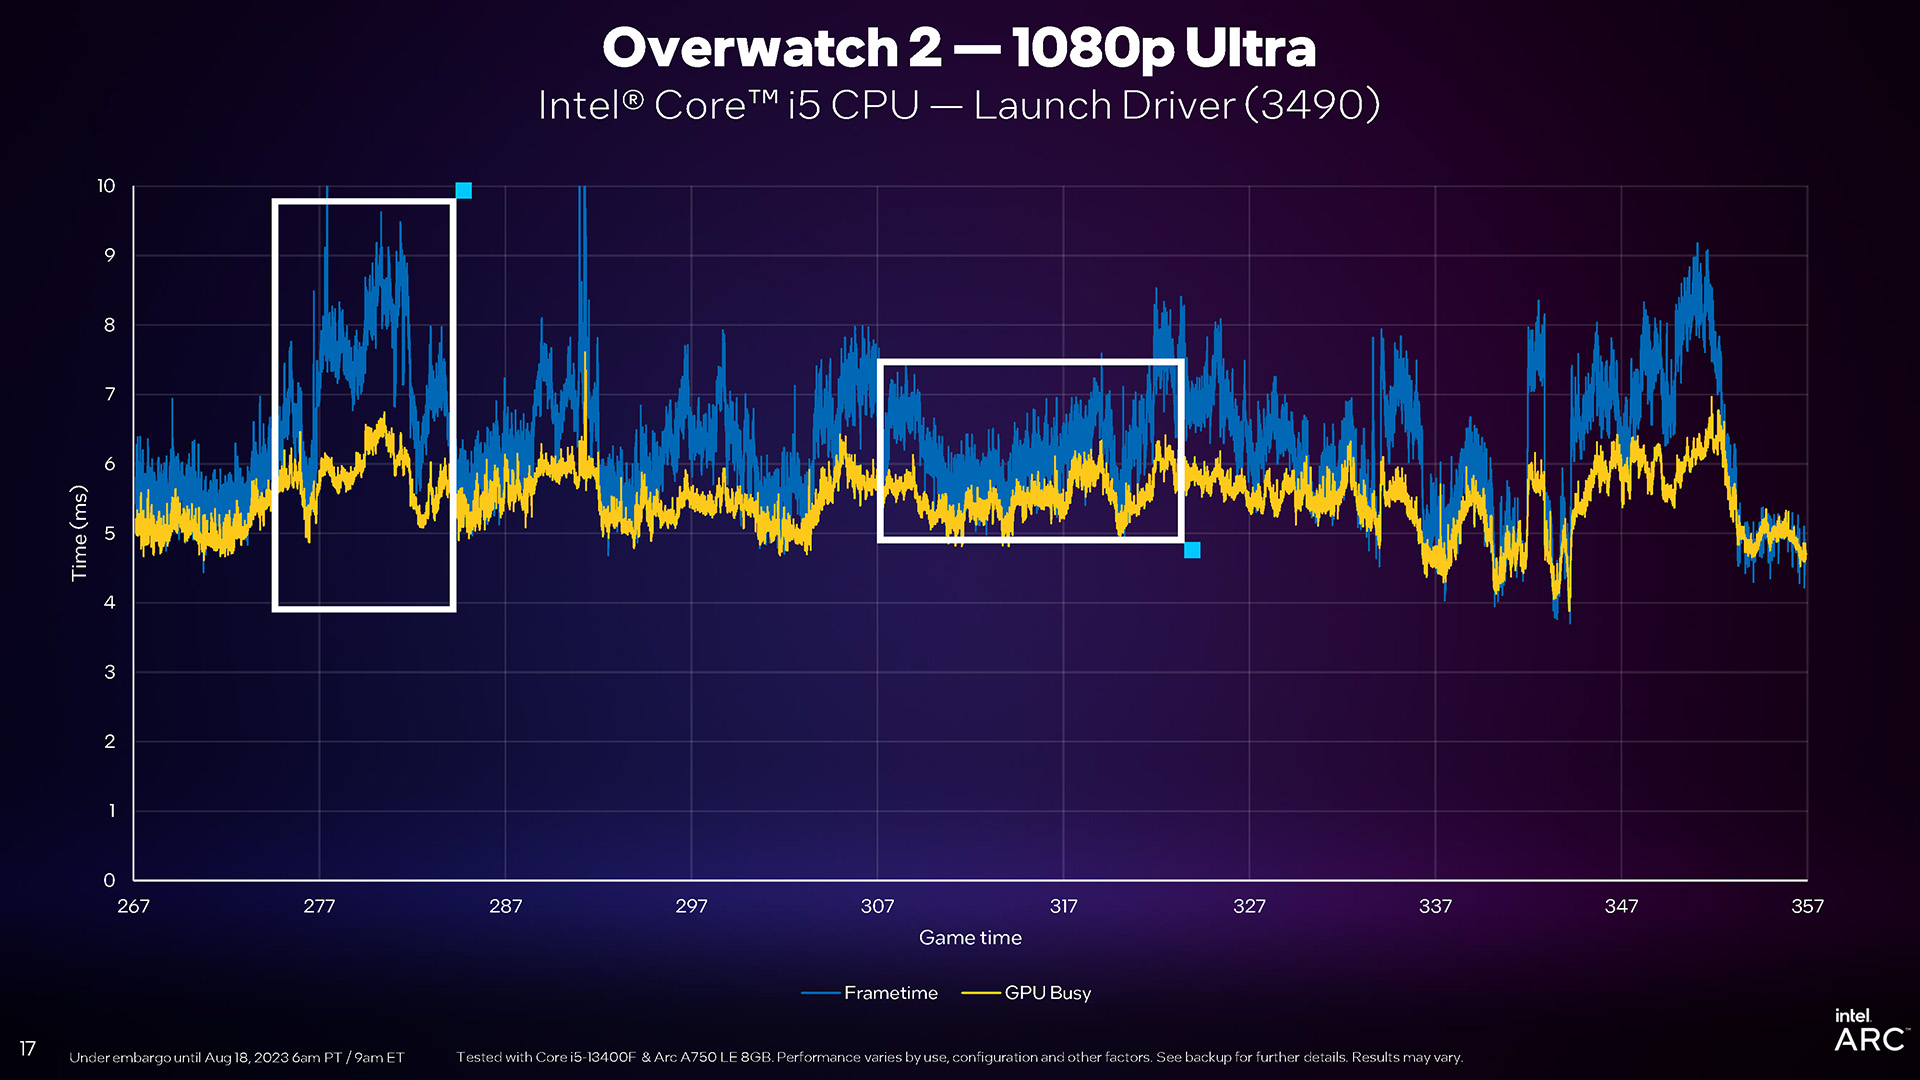 Intel Arc GPU Busy With Launch Driver and Overwatch (Q323)